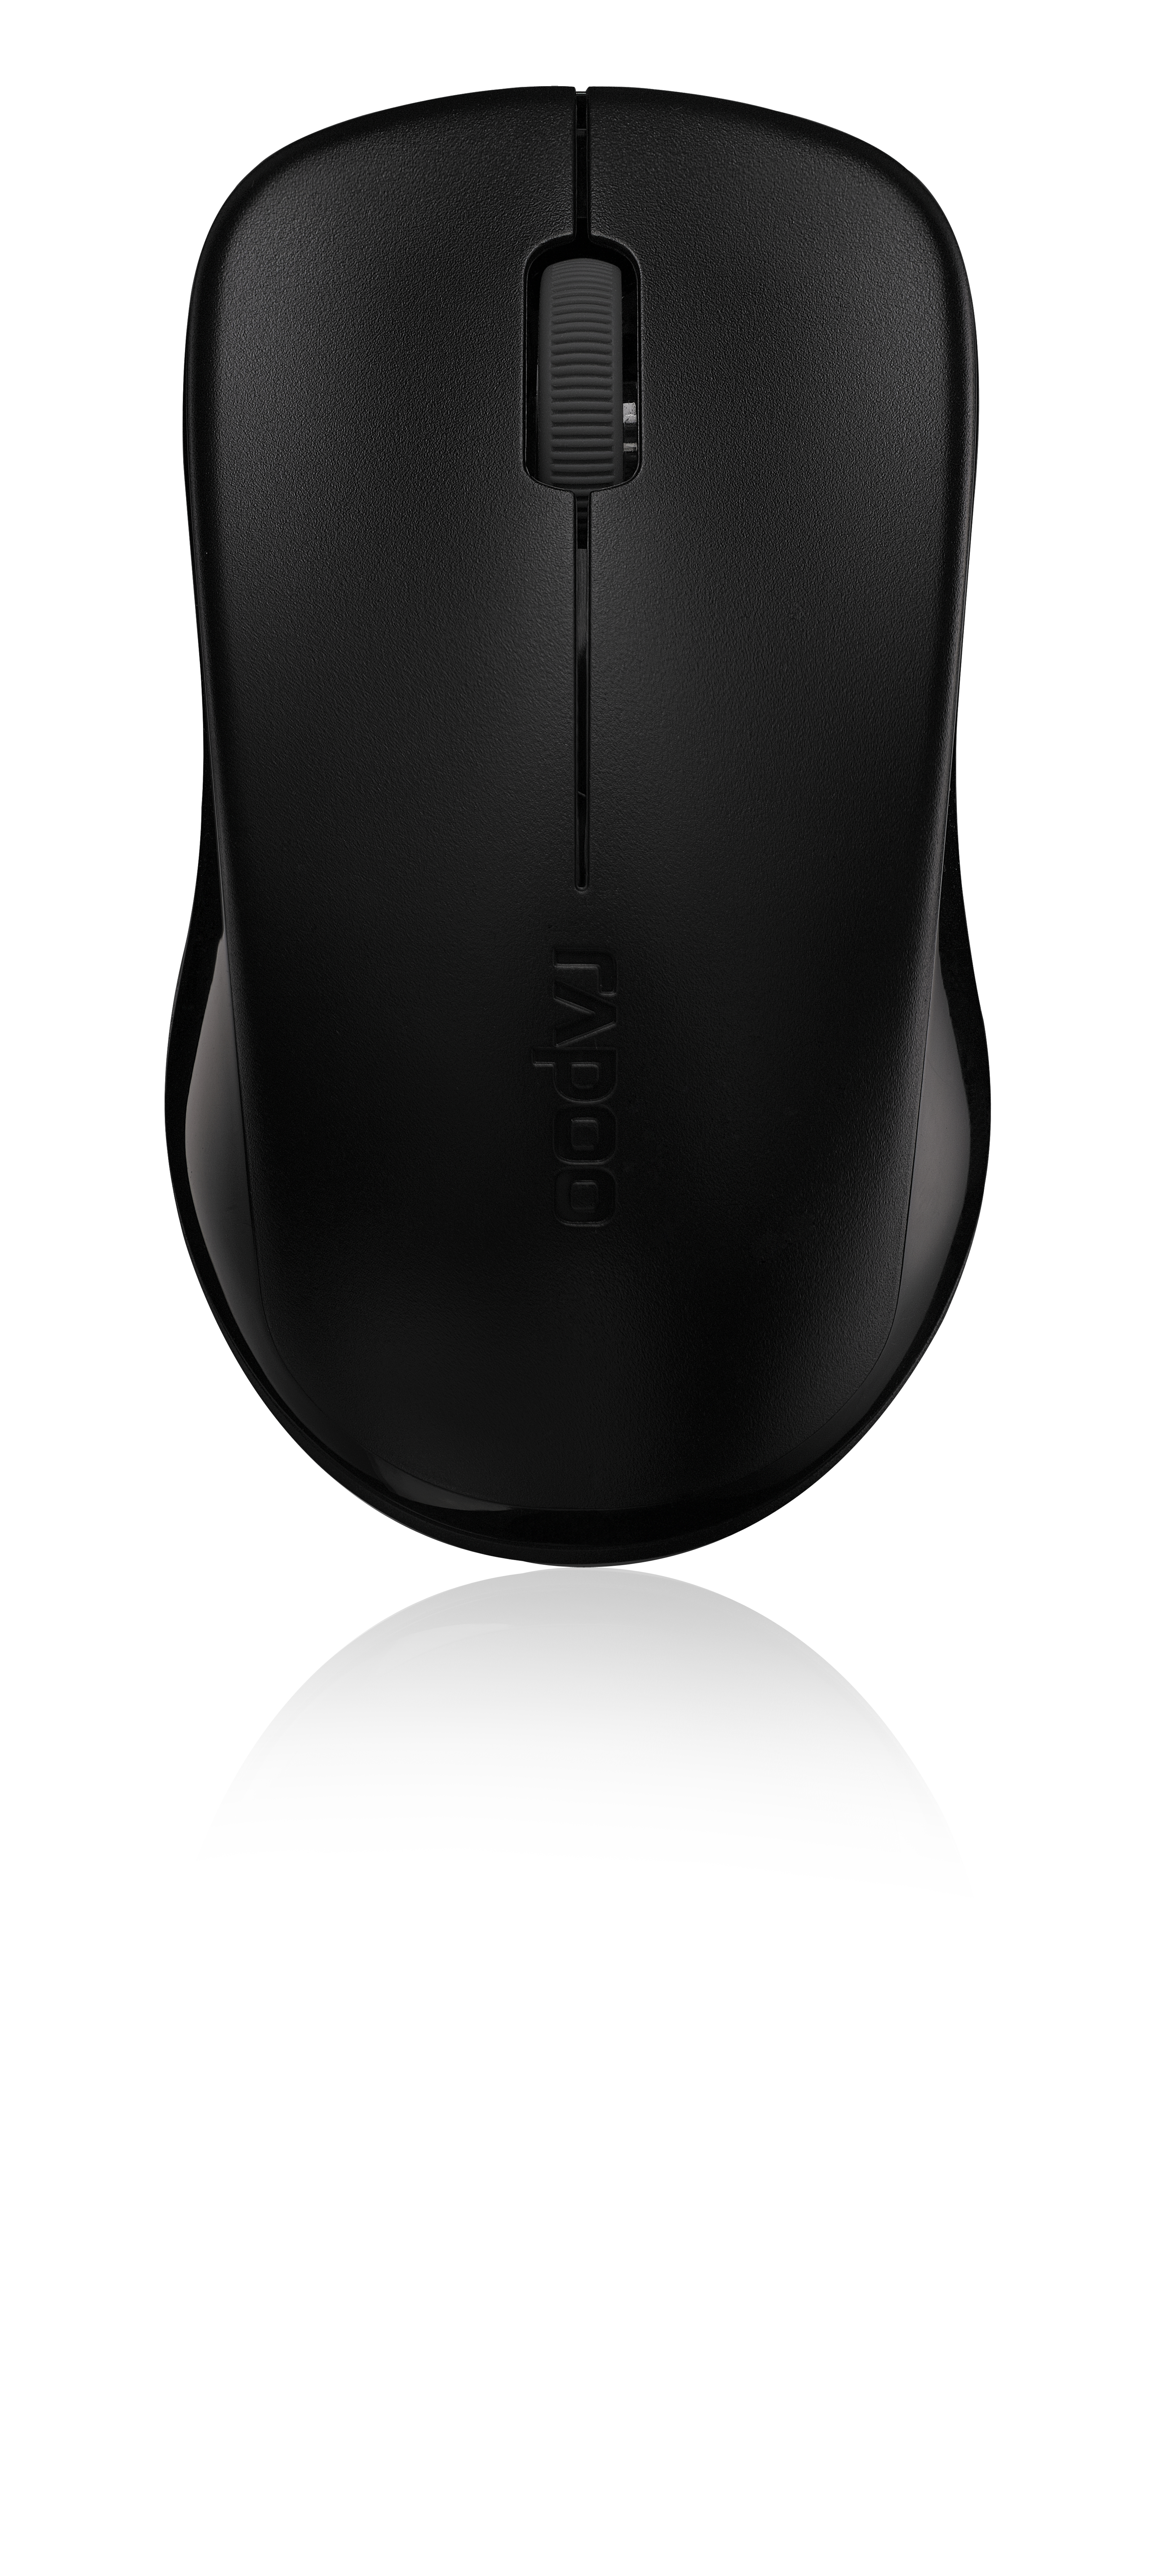 WLESS OPTICAL MOUSE 1620 BLACK